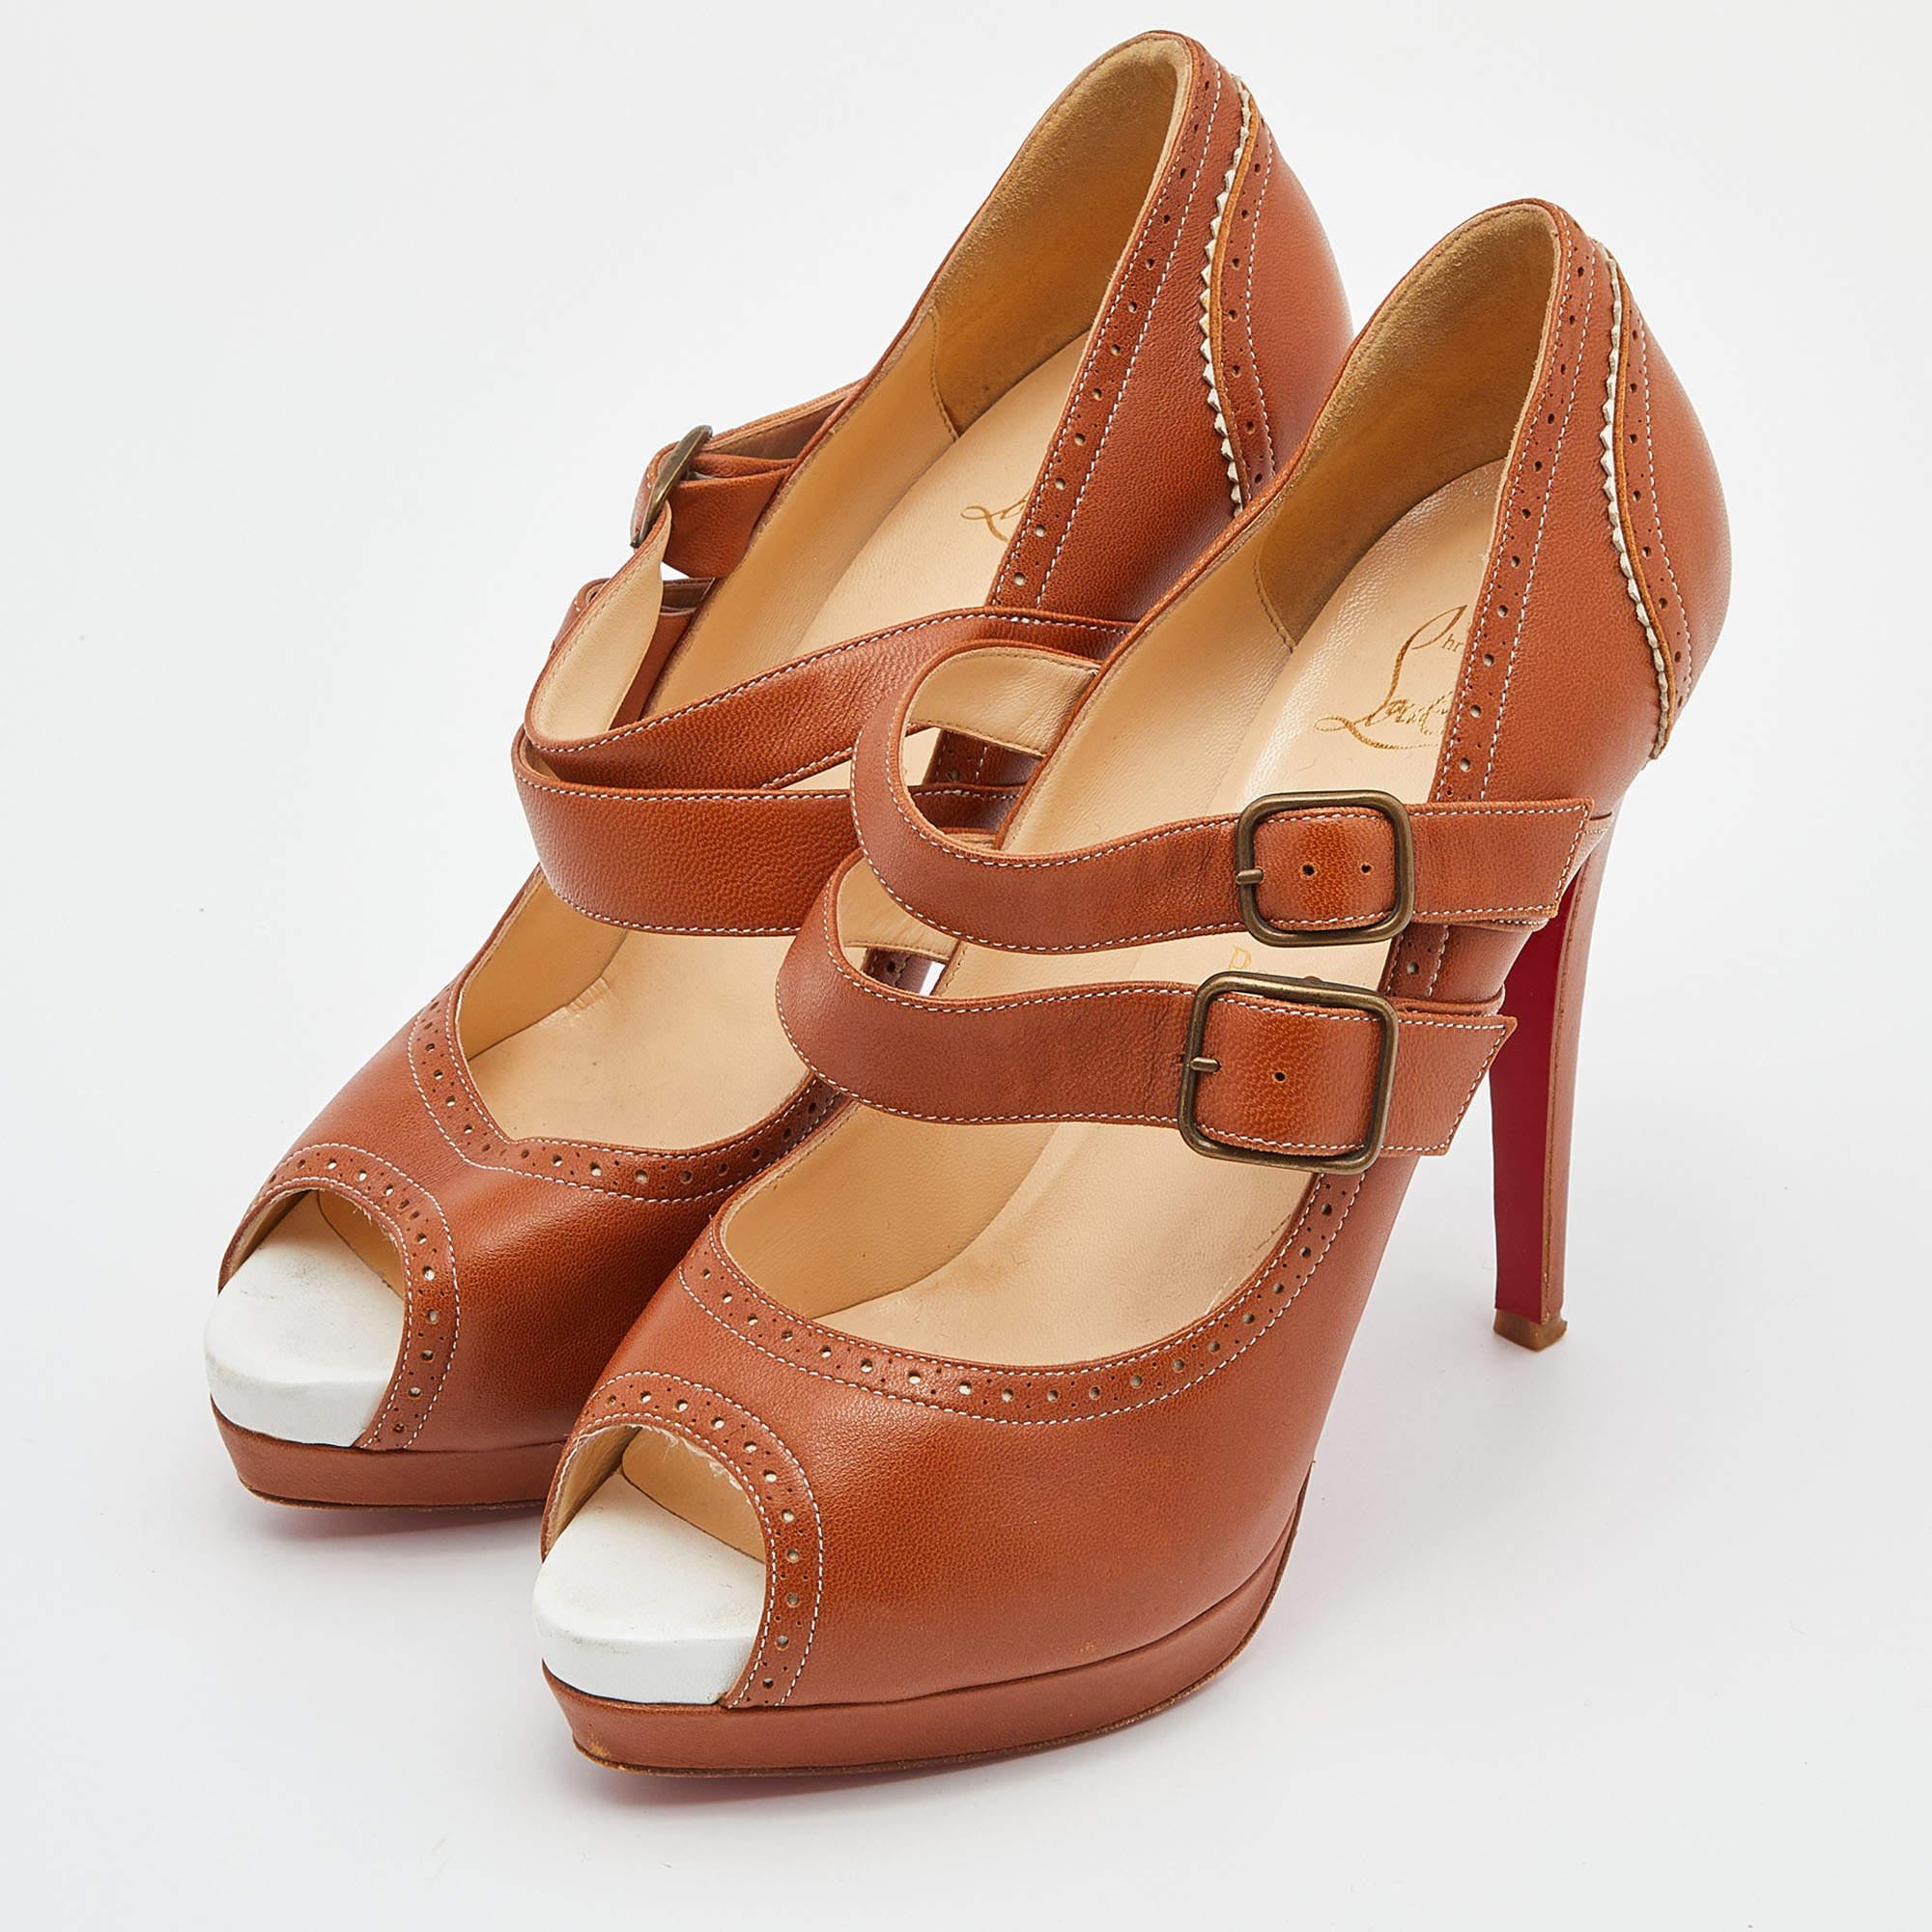 Christian Louboutin Tan Leather Luly Mary Jane Pumps Size 38 In Good Condition For Sale In Dubai, Al Qouz 2